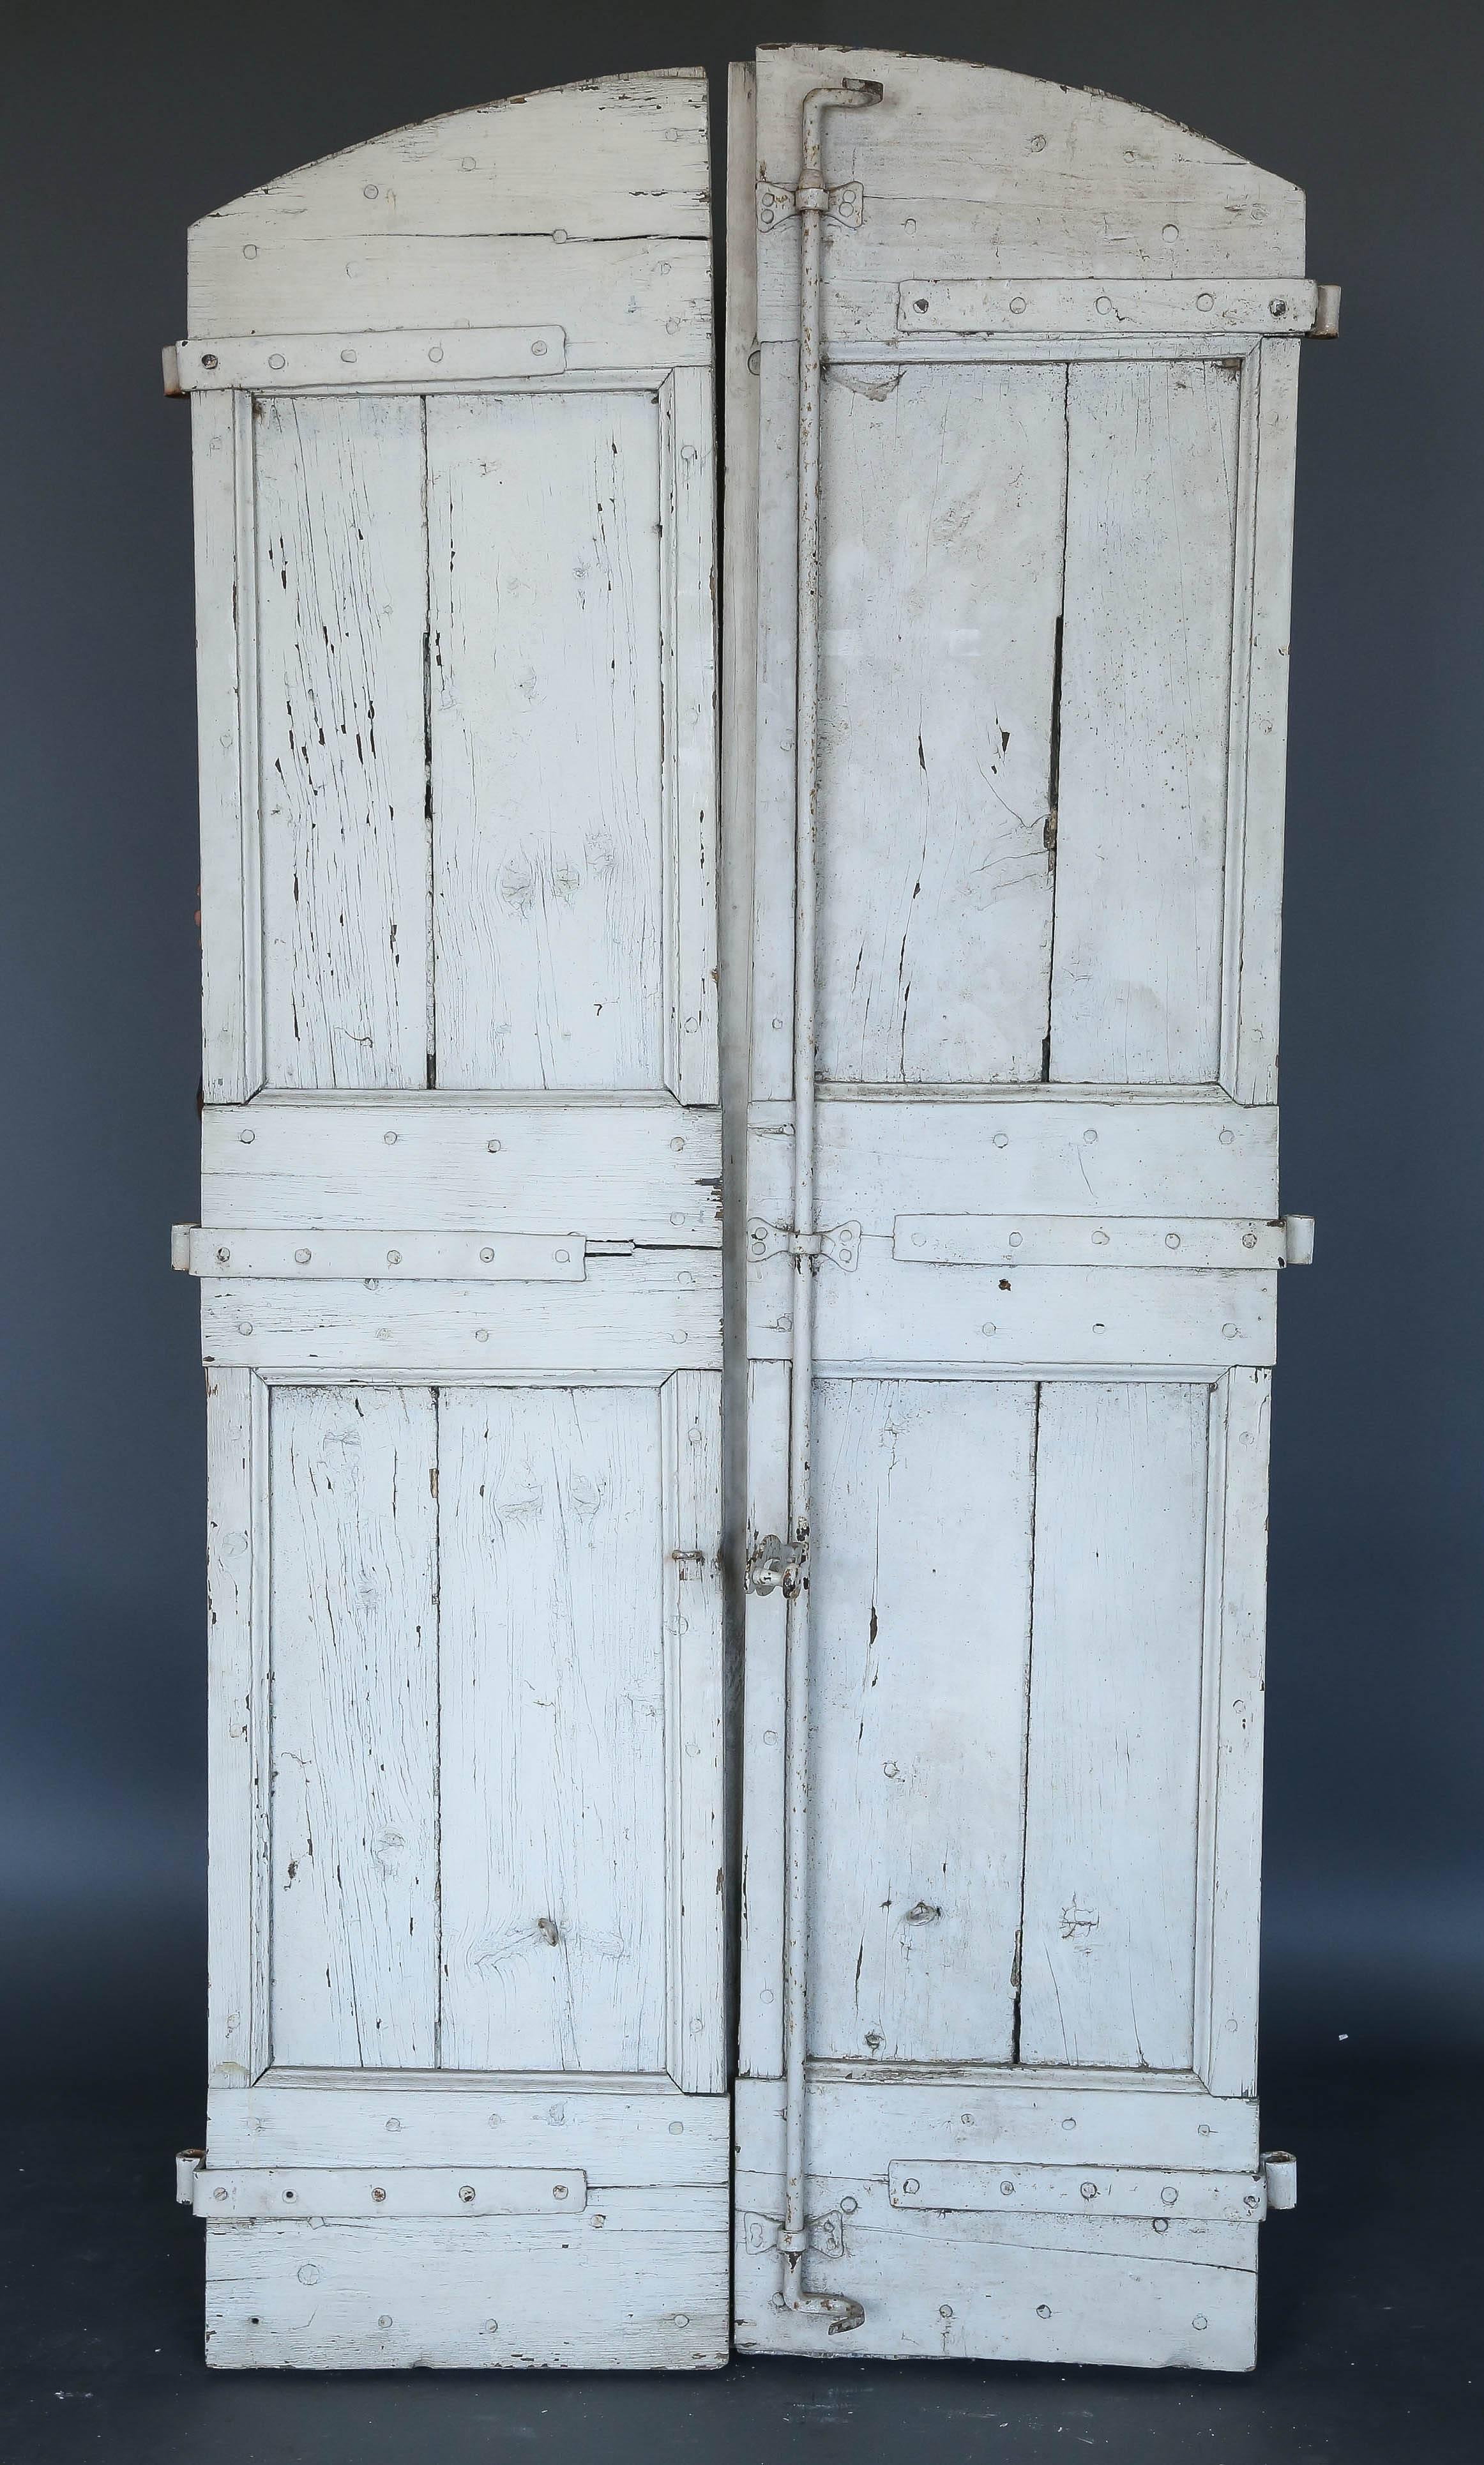 Pair of 18th century French eyebrow shape shutters with original hardware scraped white paint. Wonderful weathered patina. The weathered look is from years of exposure to the elements. The shutters are sturdy. They would make wonderful doors.